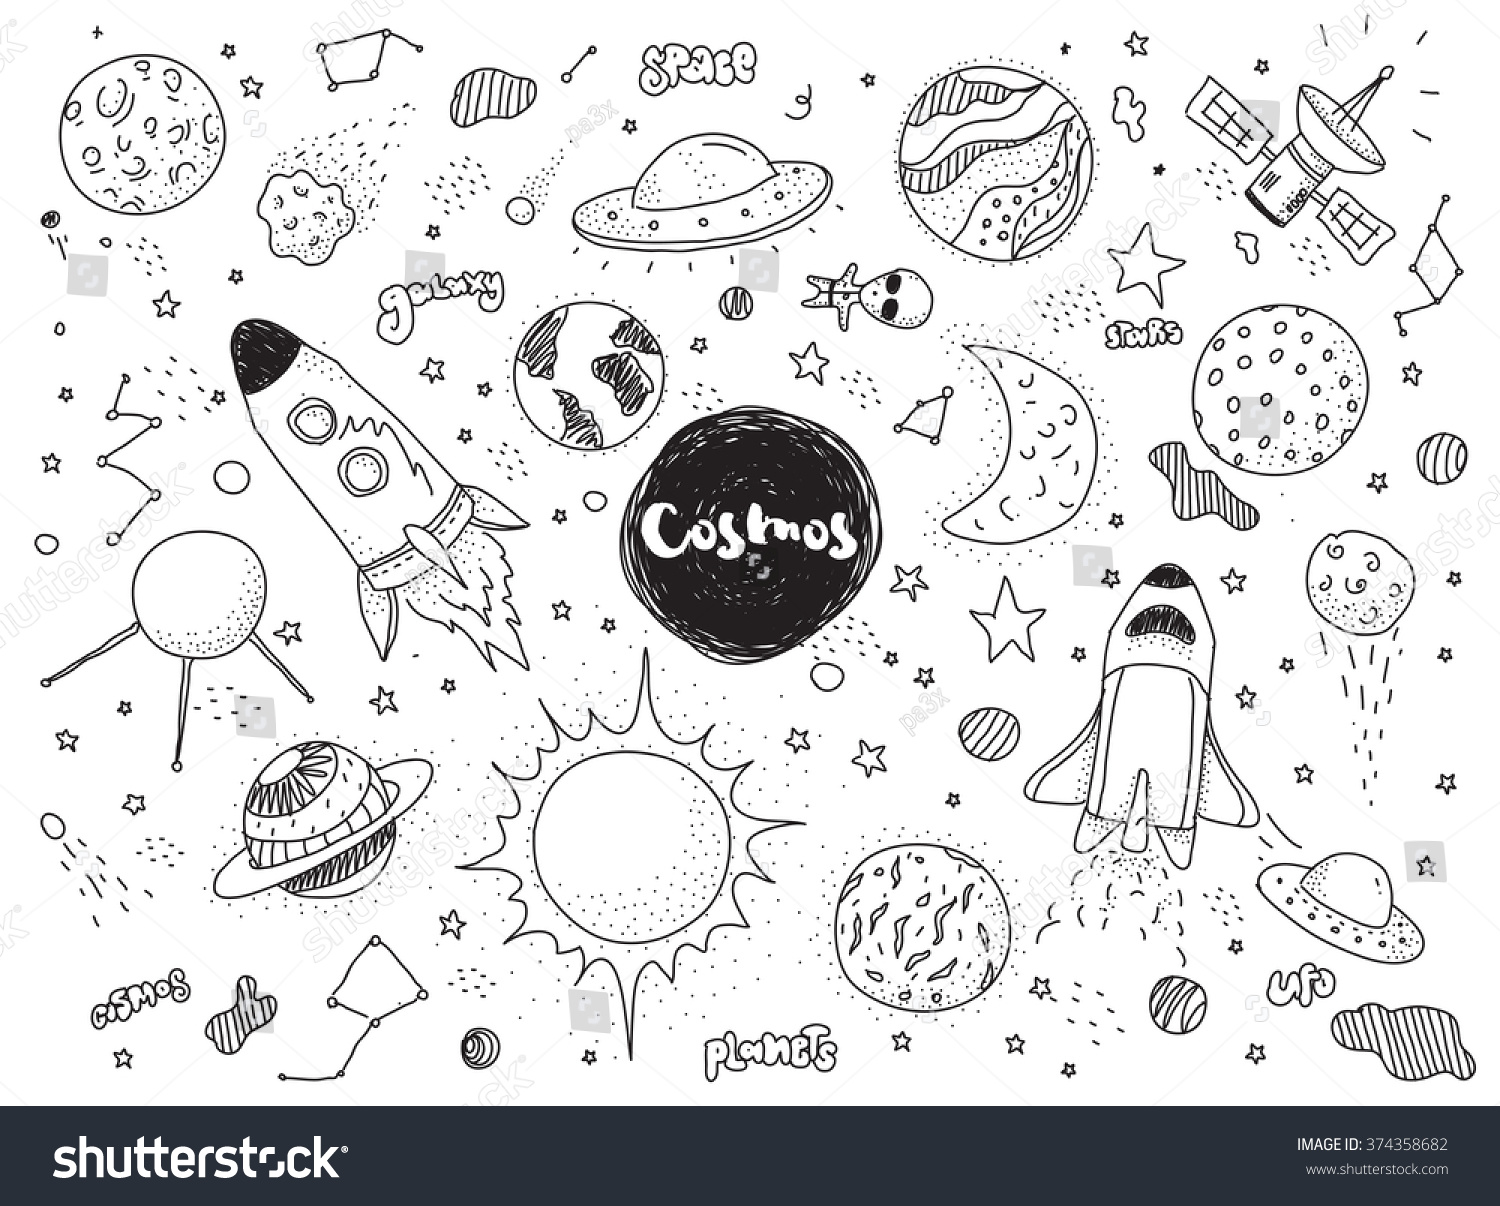 Cosmic Objects Set Hand Drawn Space Stock Vector (Royalty Free